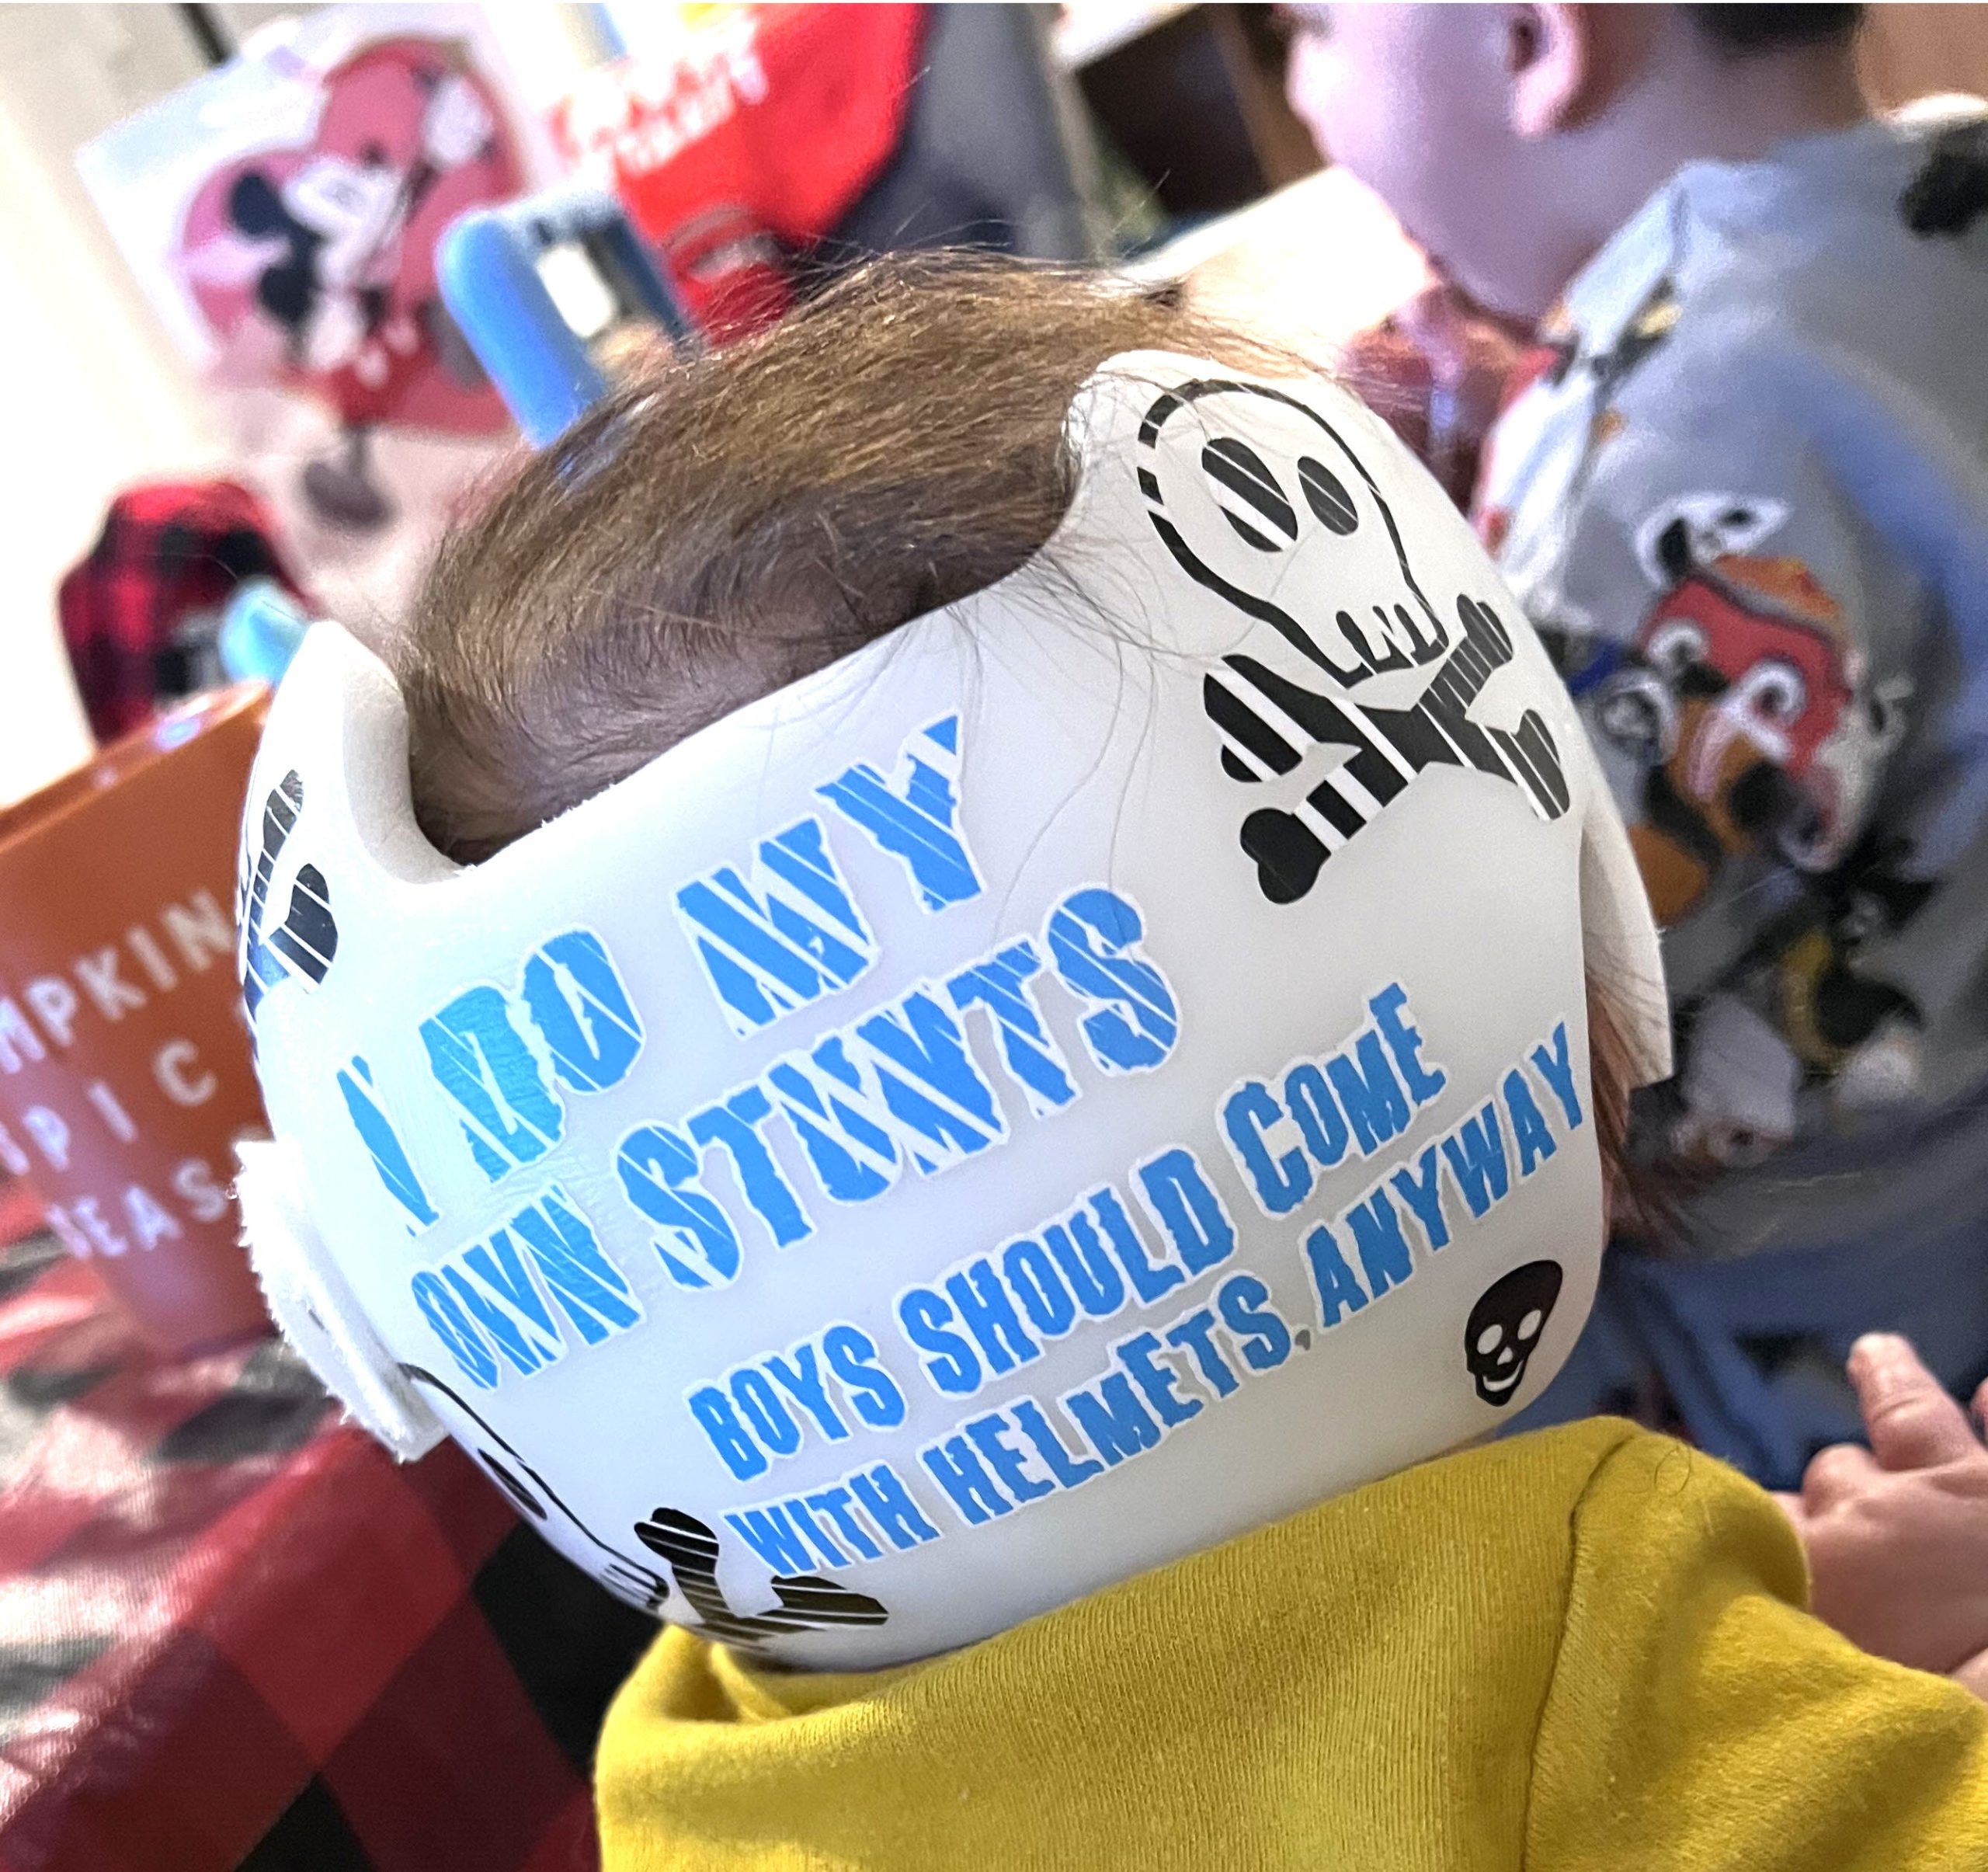 boys should come with helmets anyway doc band decals